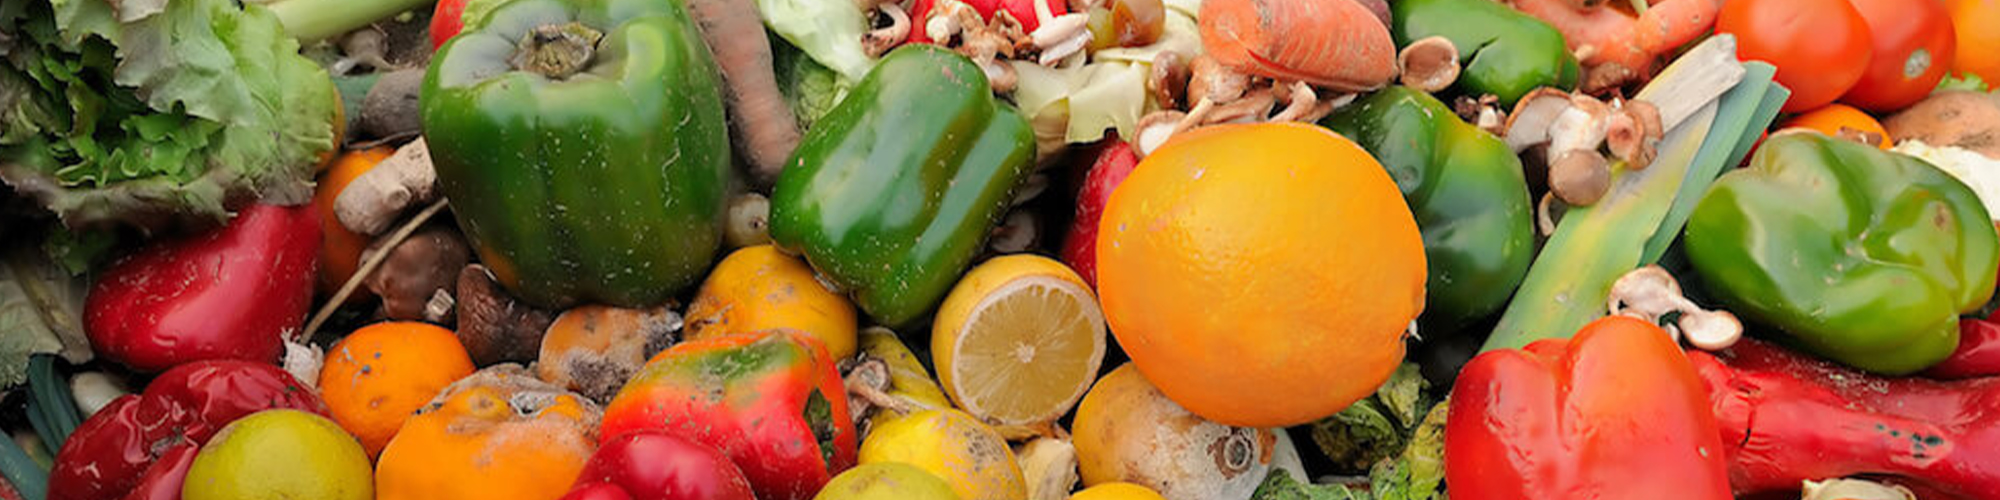 Tyler England: The UK should have a Food Waste Network